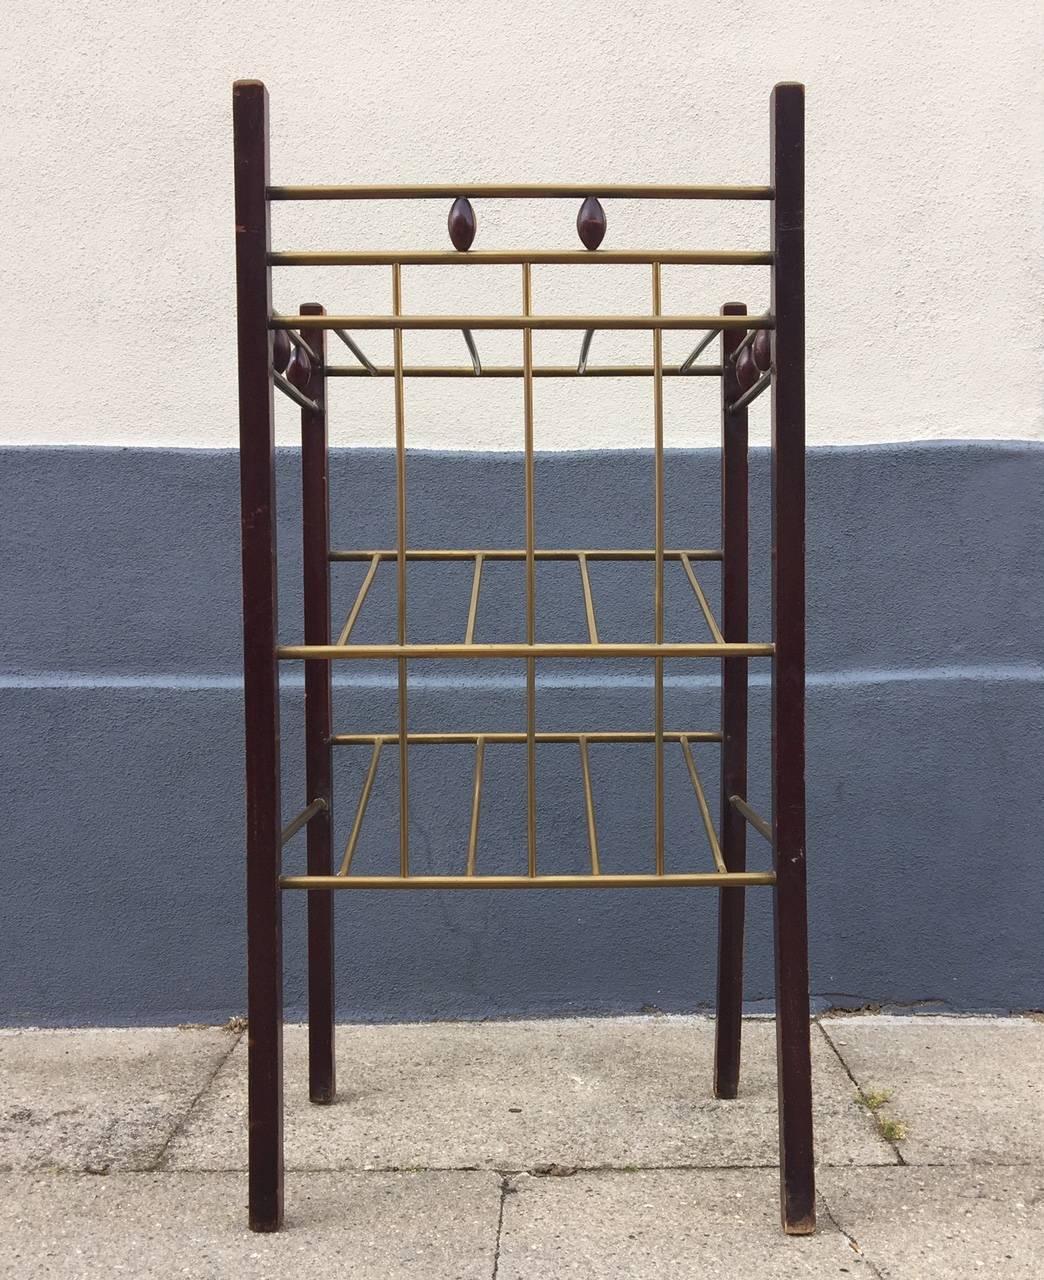 Austrian Vienna Secession Sheet Music or Magazine Rack, Koloman Moser Style, 1900s For Sale